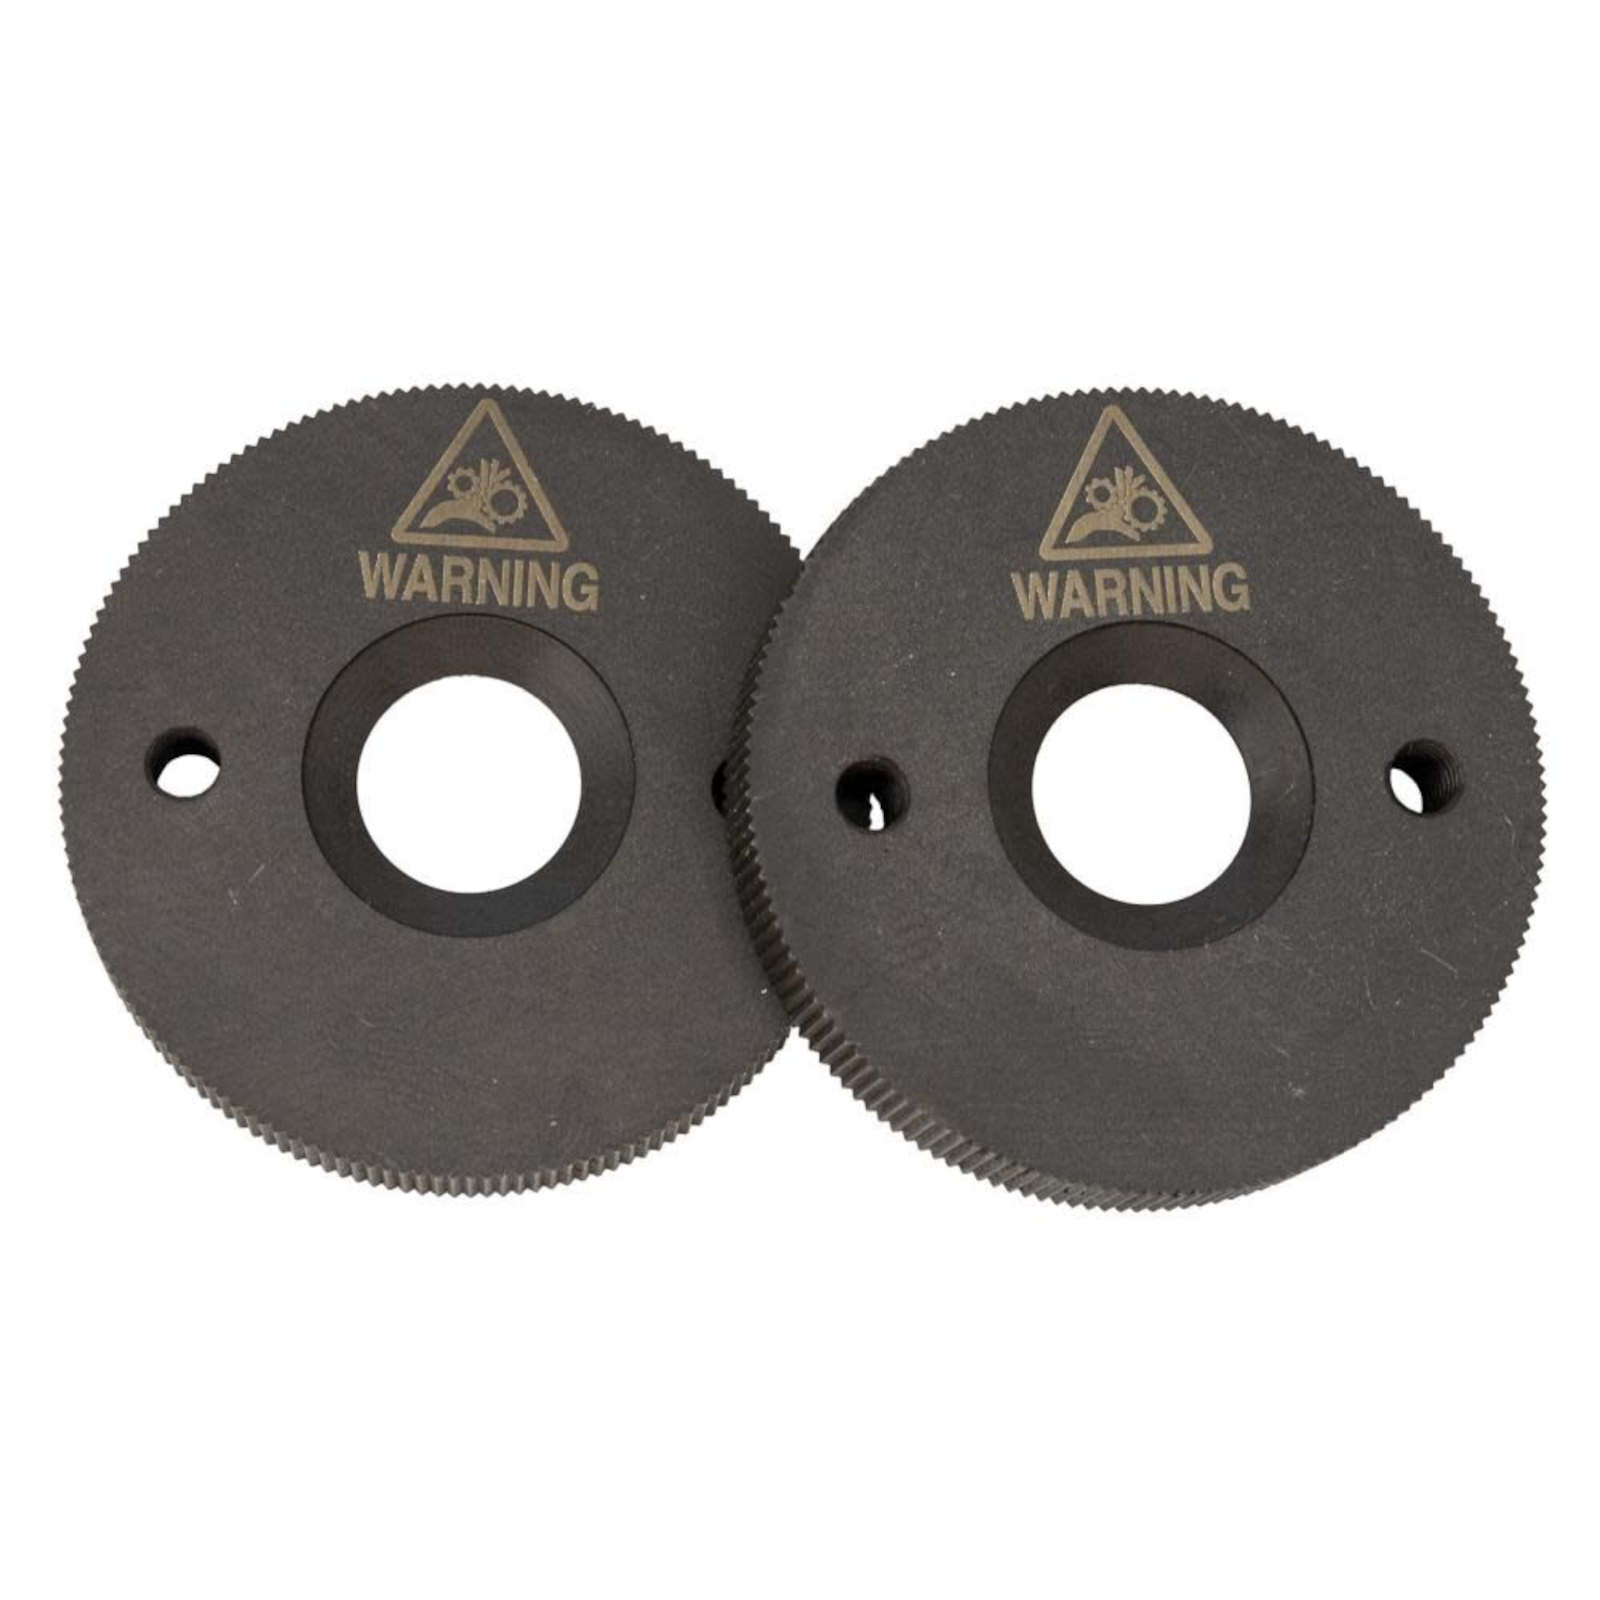 Malco Replacement Cutting Disc Set